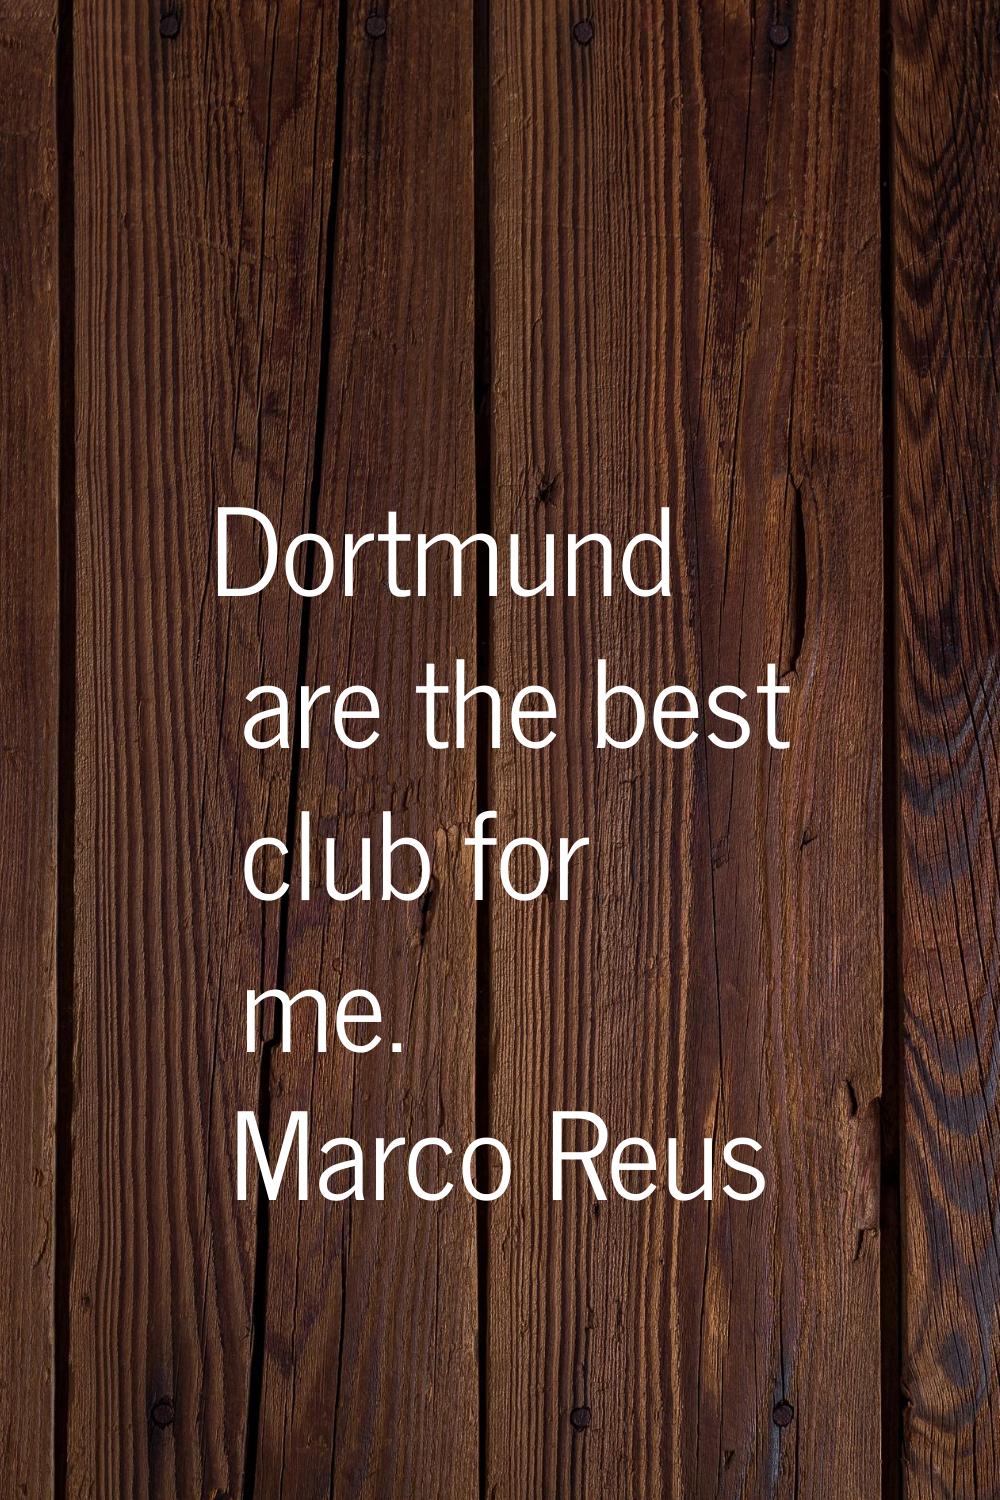 Dortmund are the best club for me.